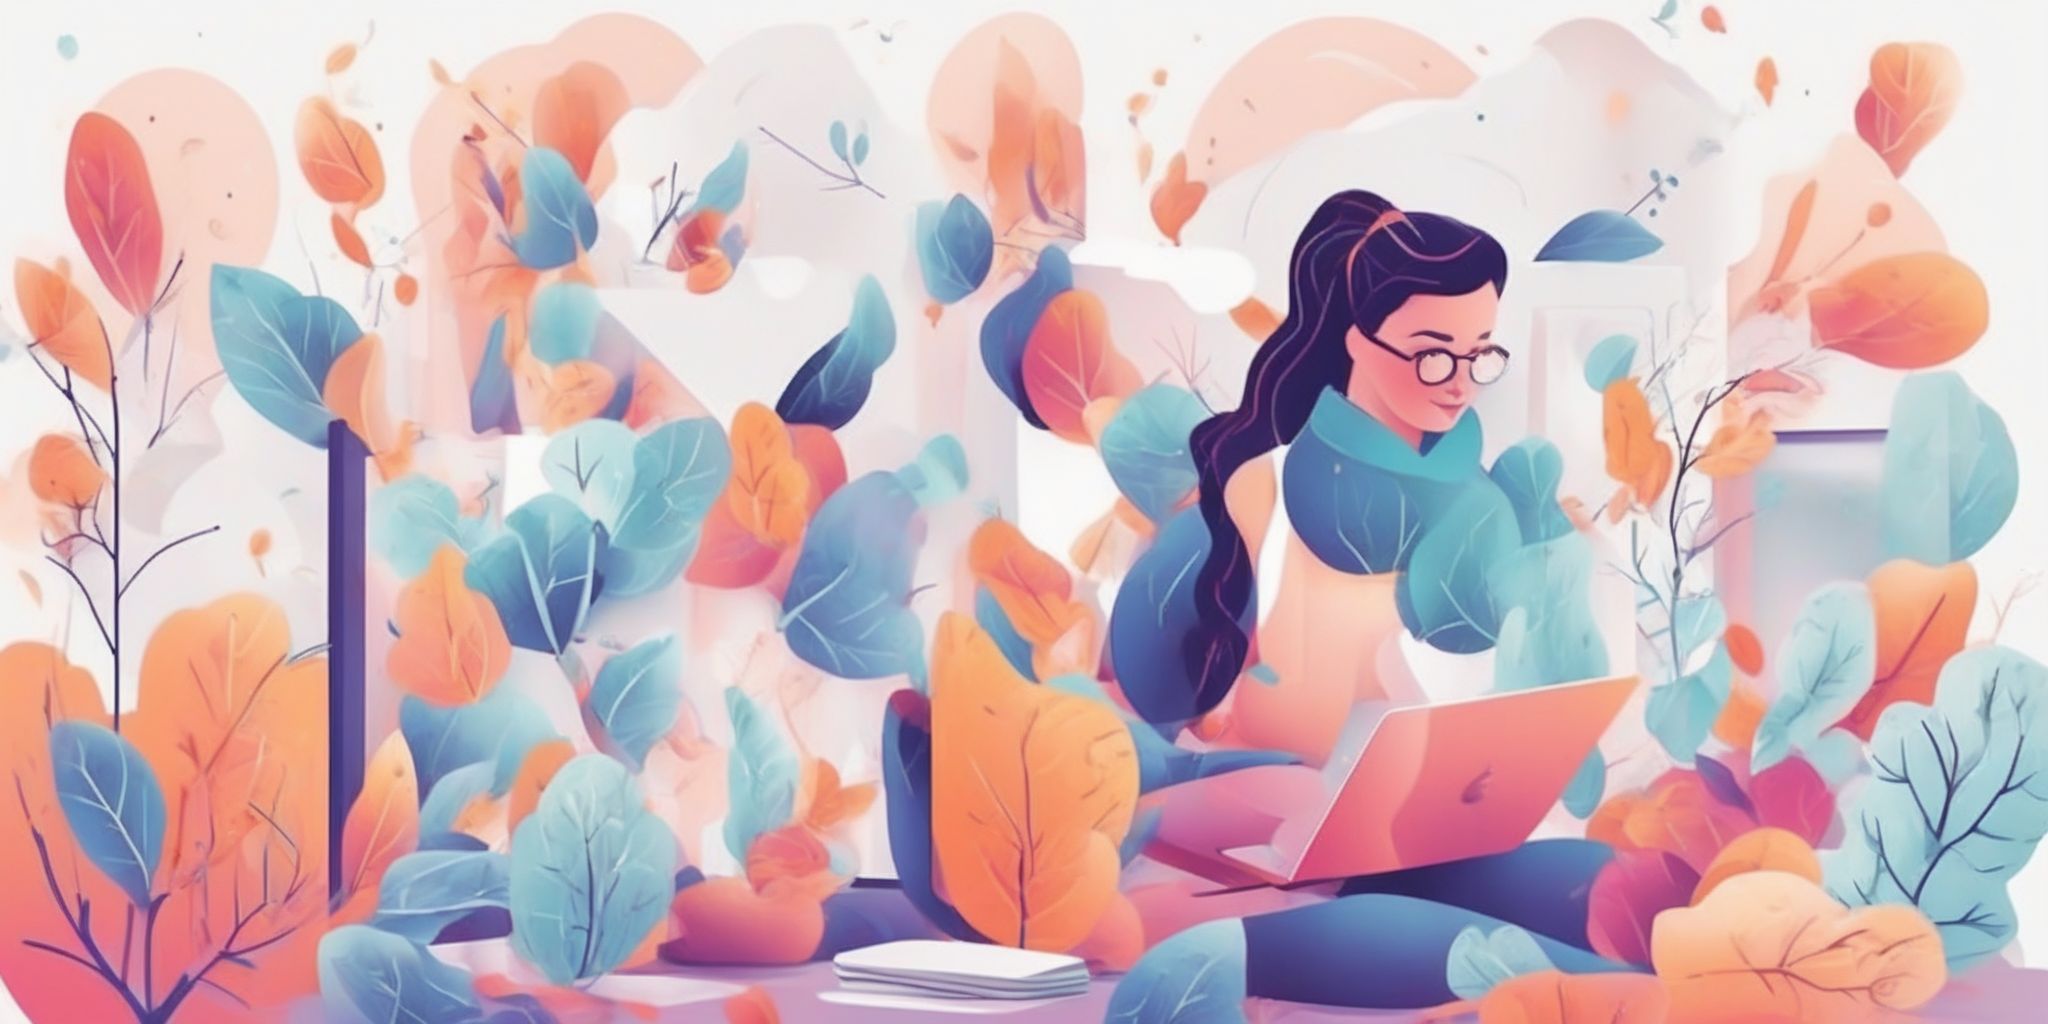 Content creation in illustration style with gradients and white background